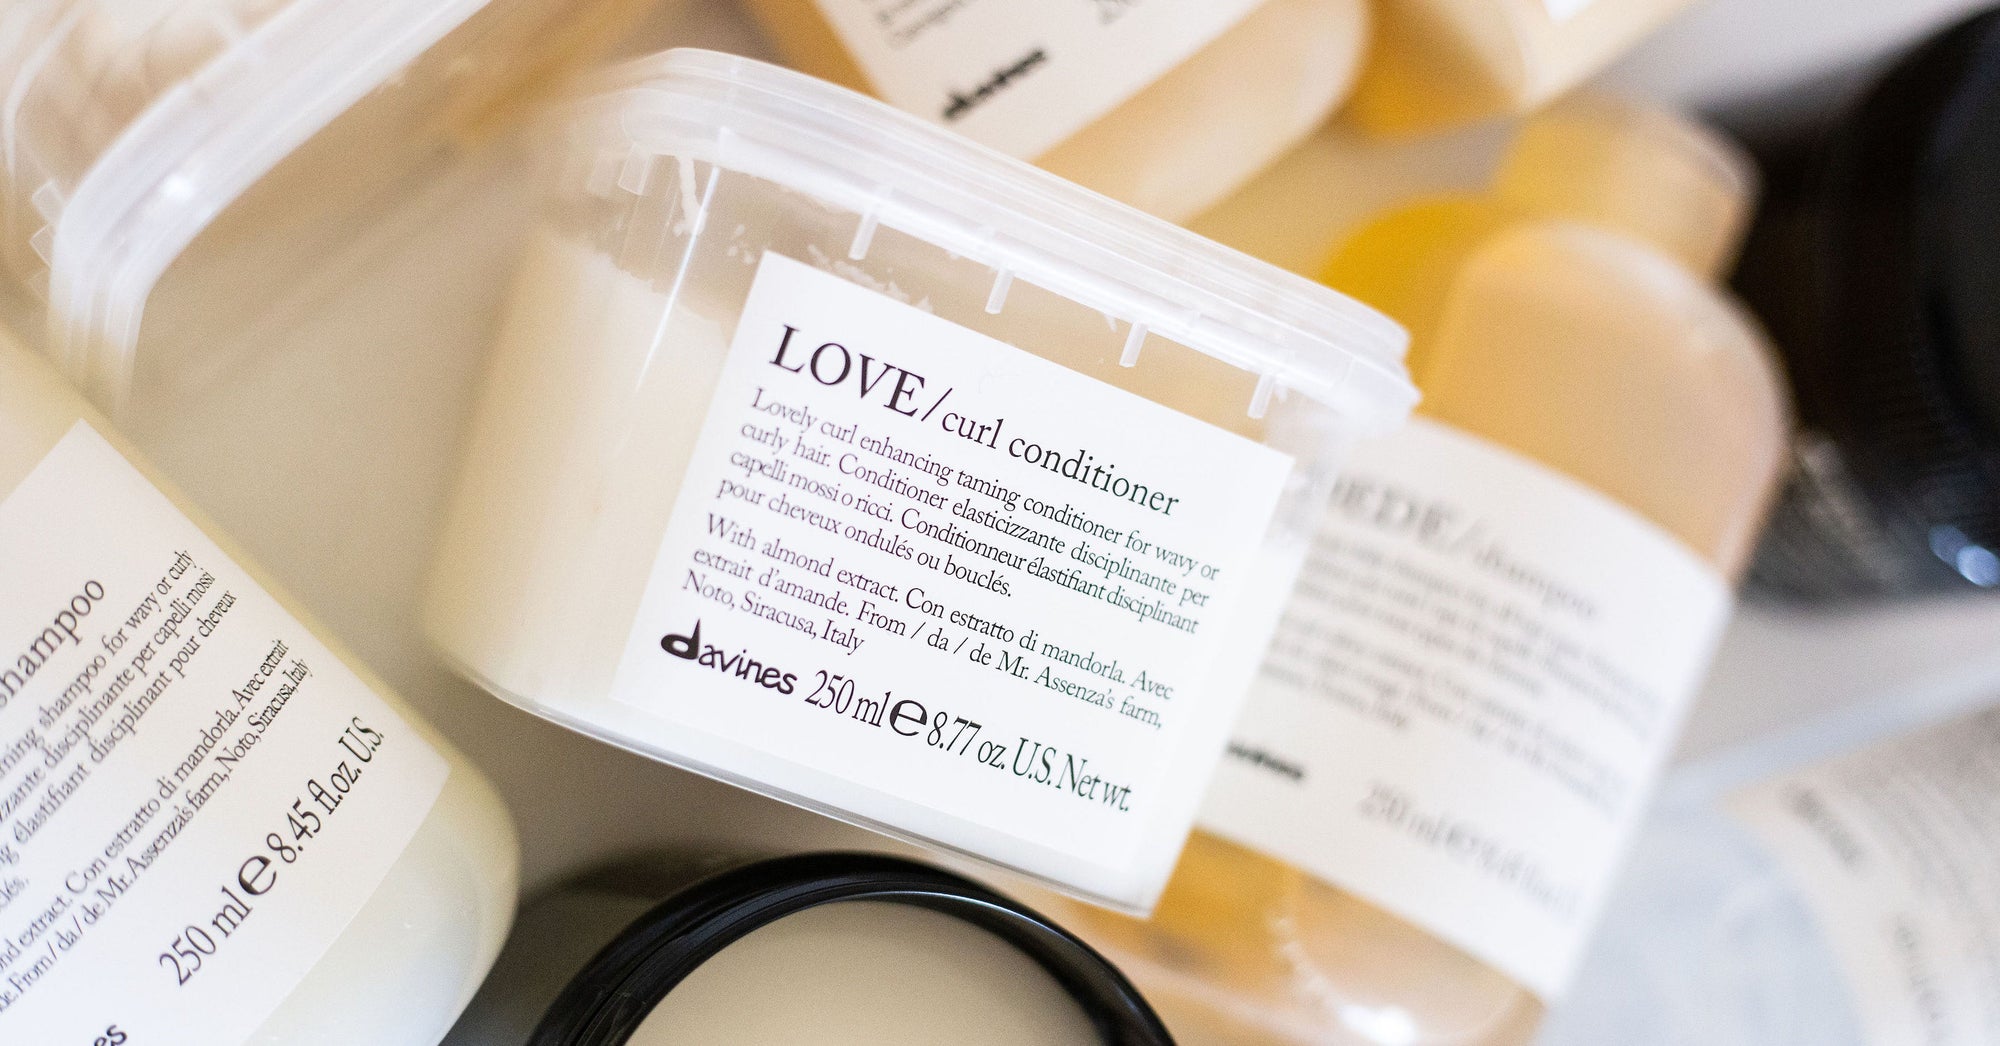 Davines LOVE Curl Conditioner for curly hair